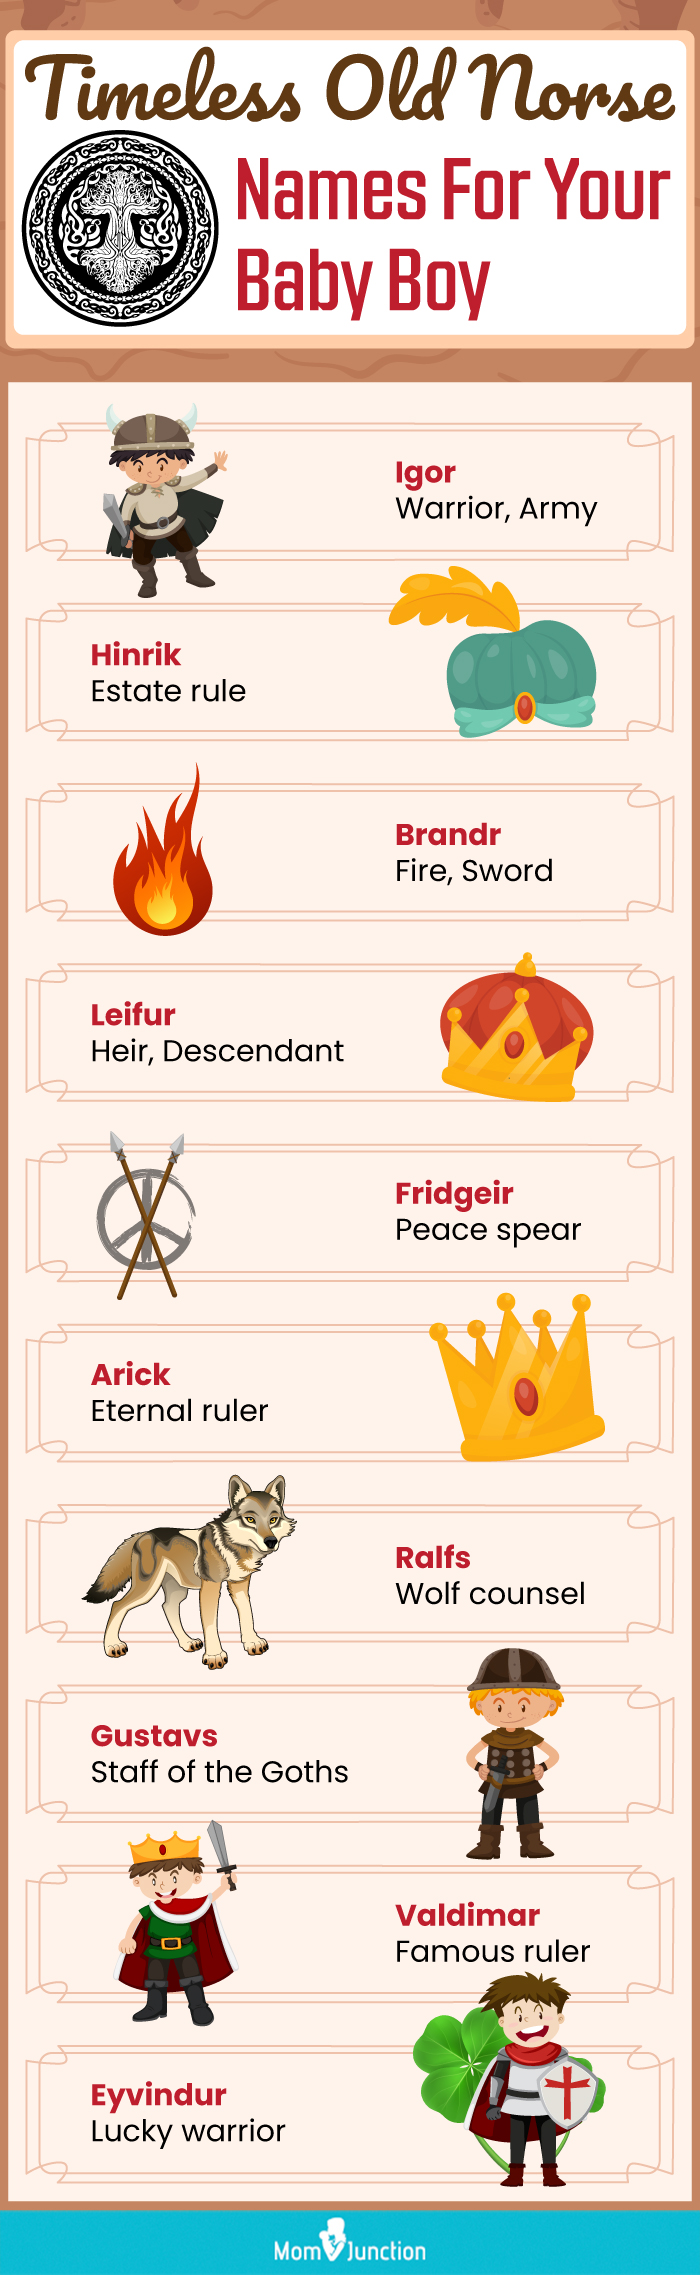 timeless old norse names for your baby boy (infographic)